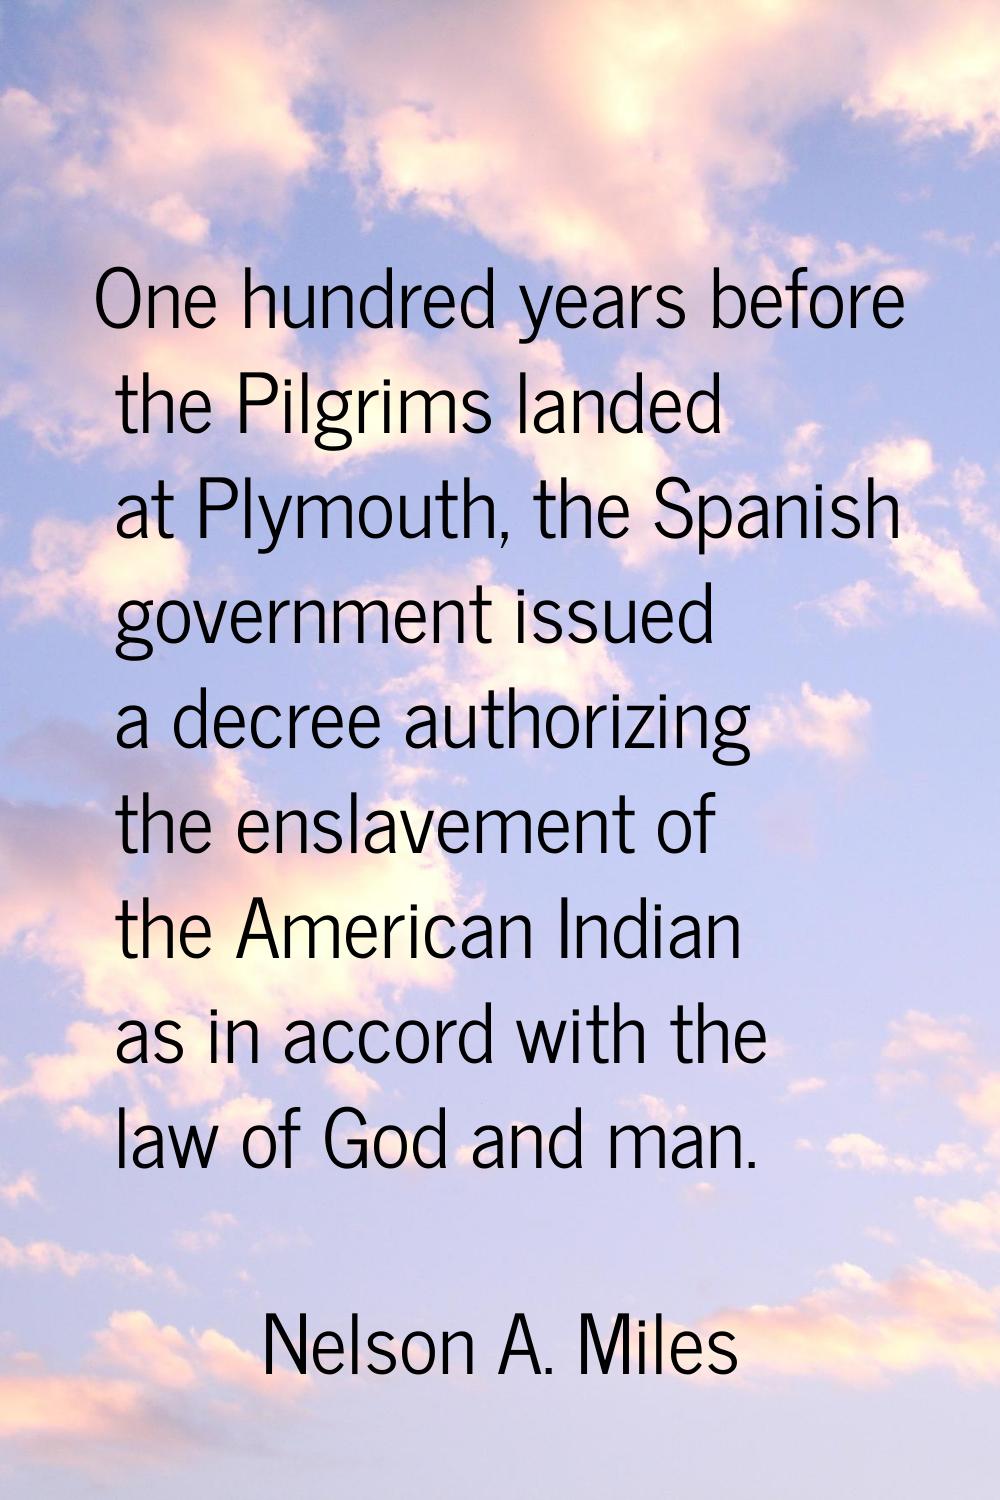 One hundred years before the Pilgrims landed at Plymouth, the Spanish government issued a decree au